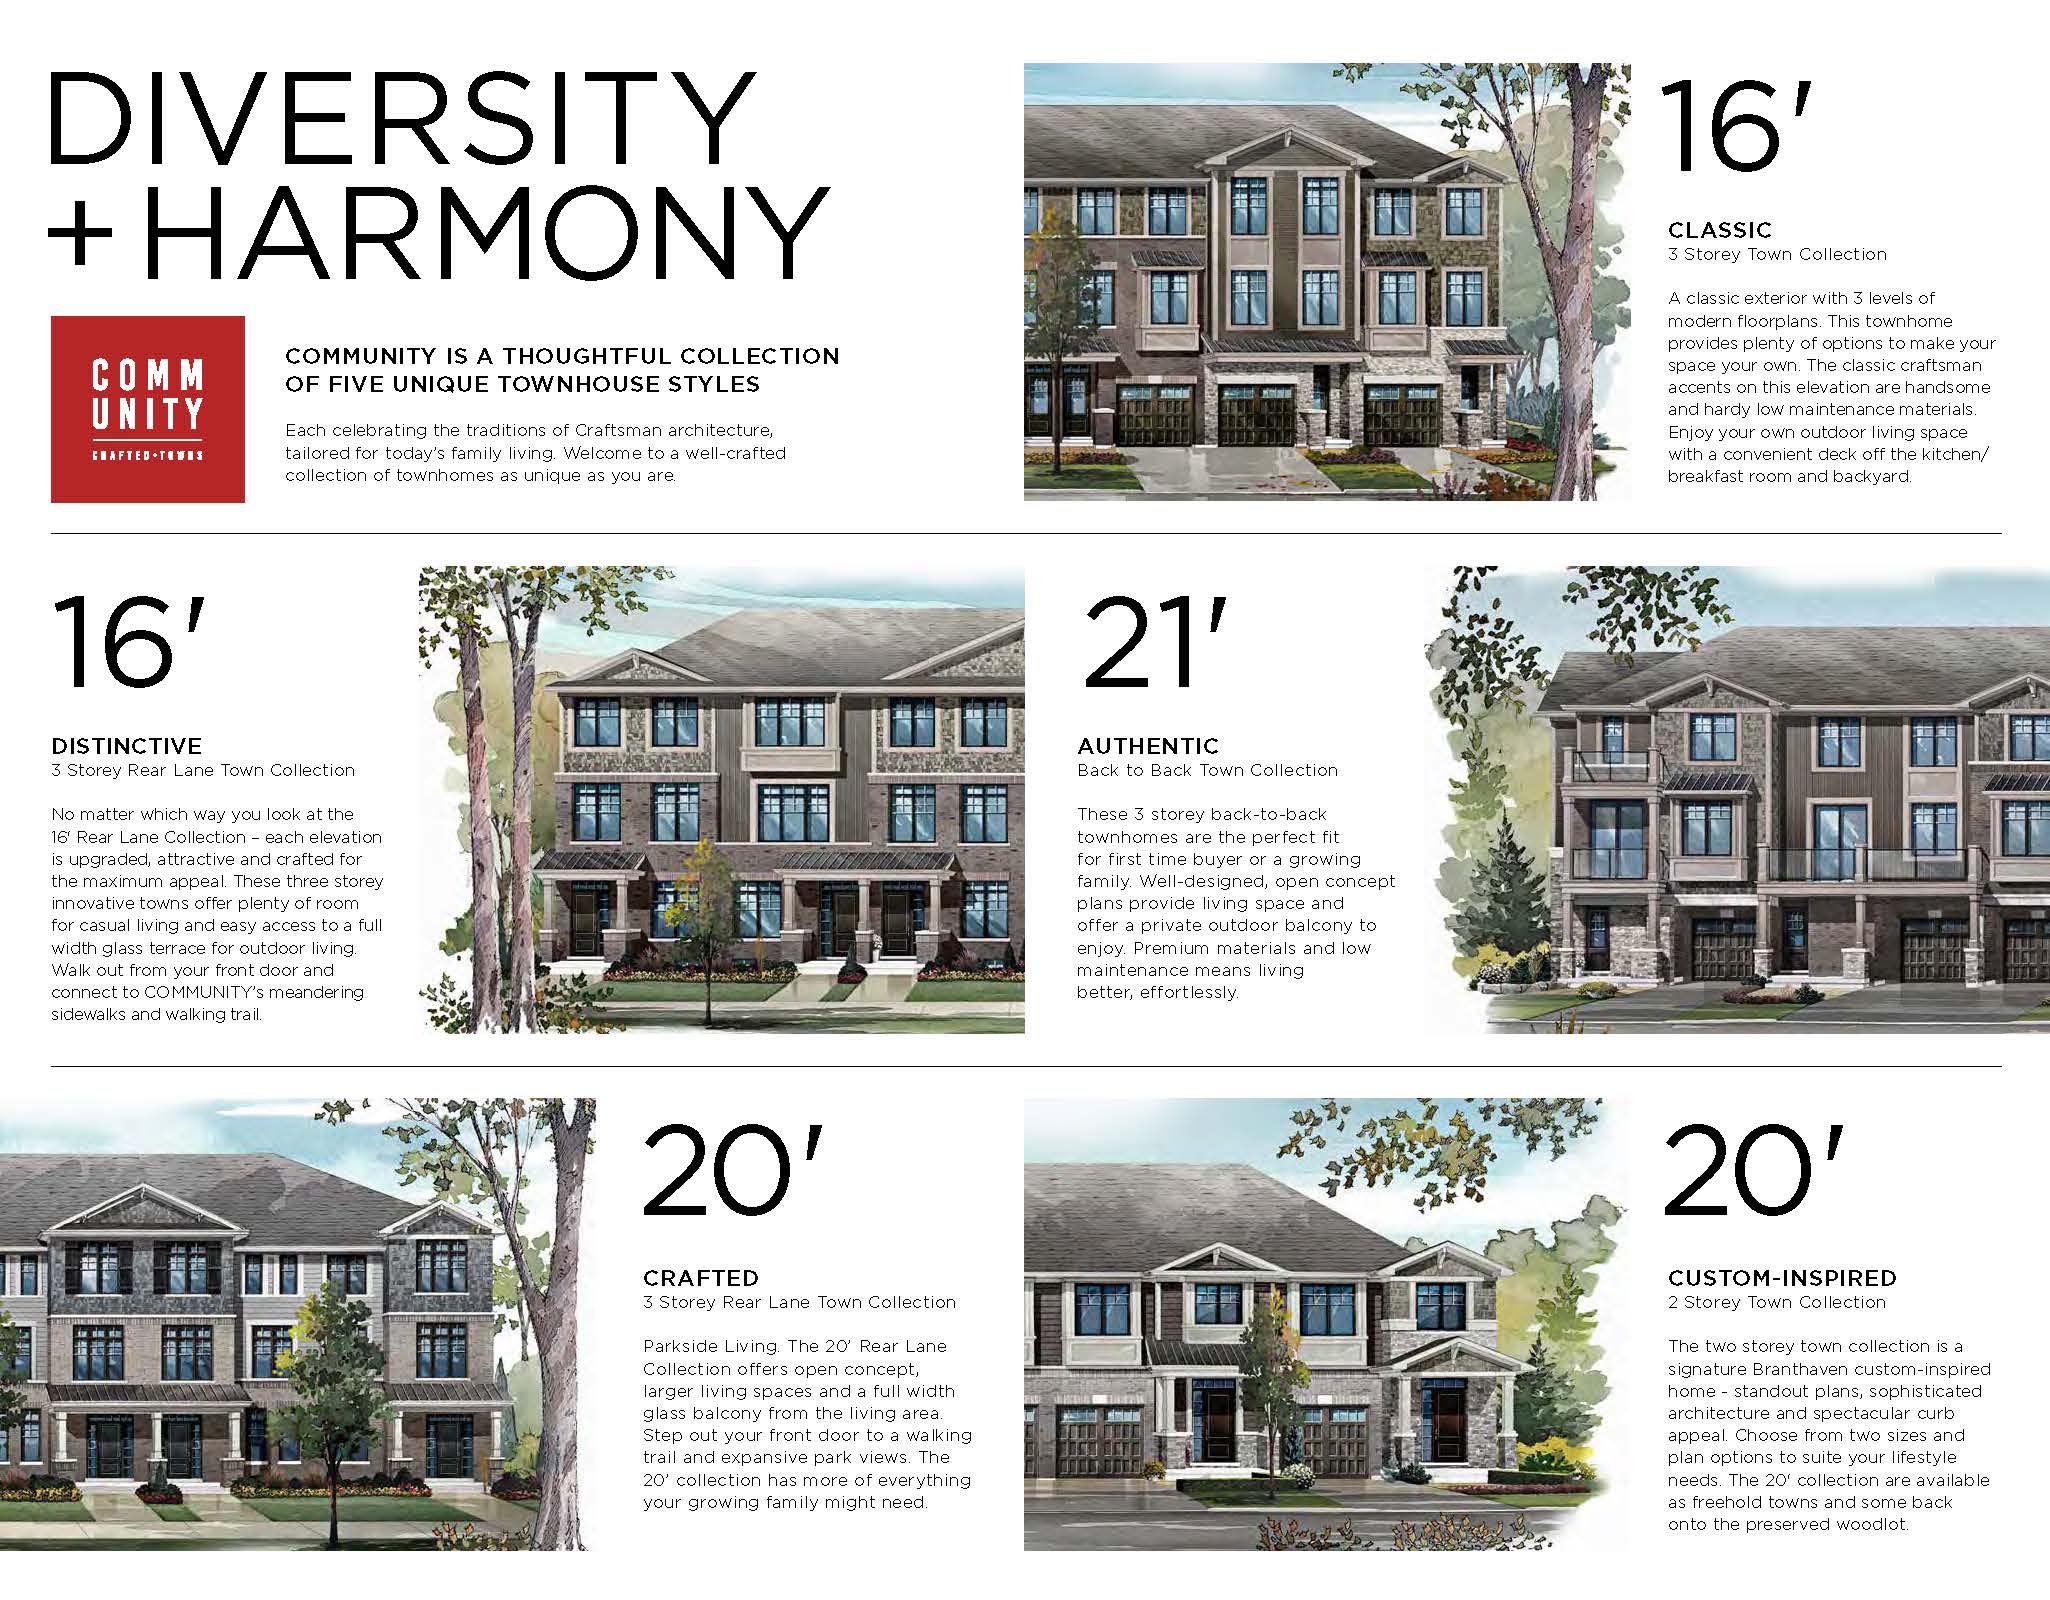 Community Crafted Towns types of units available.